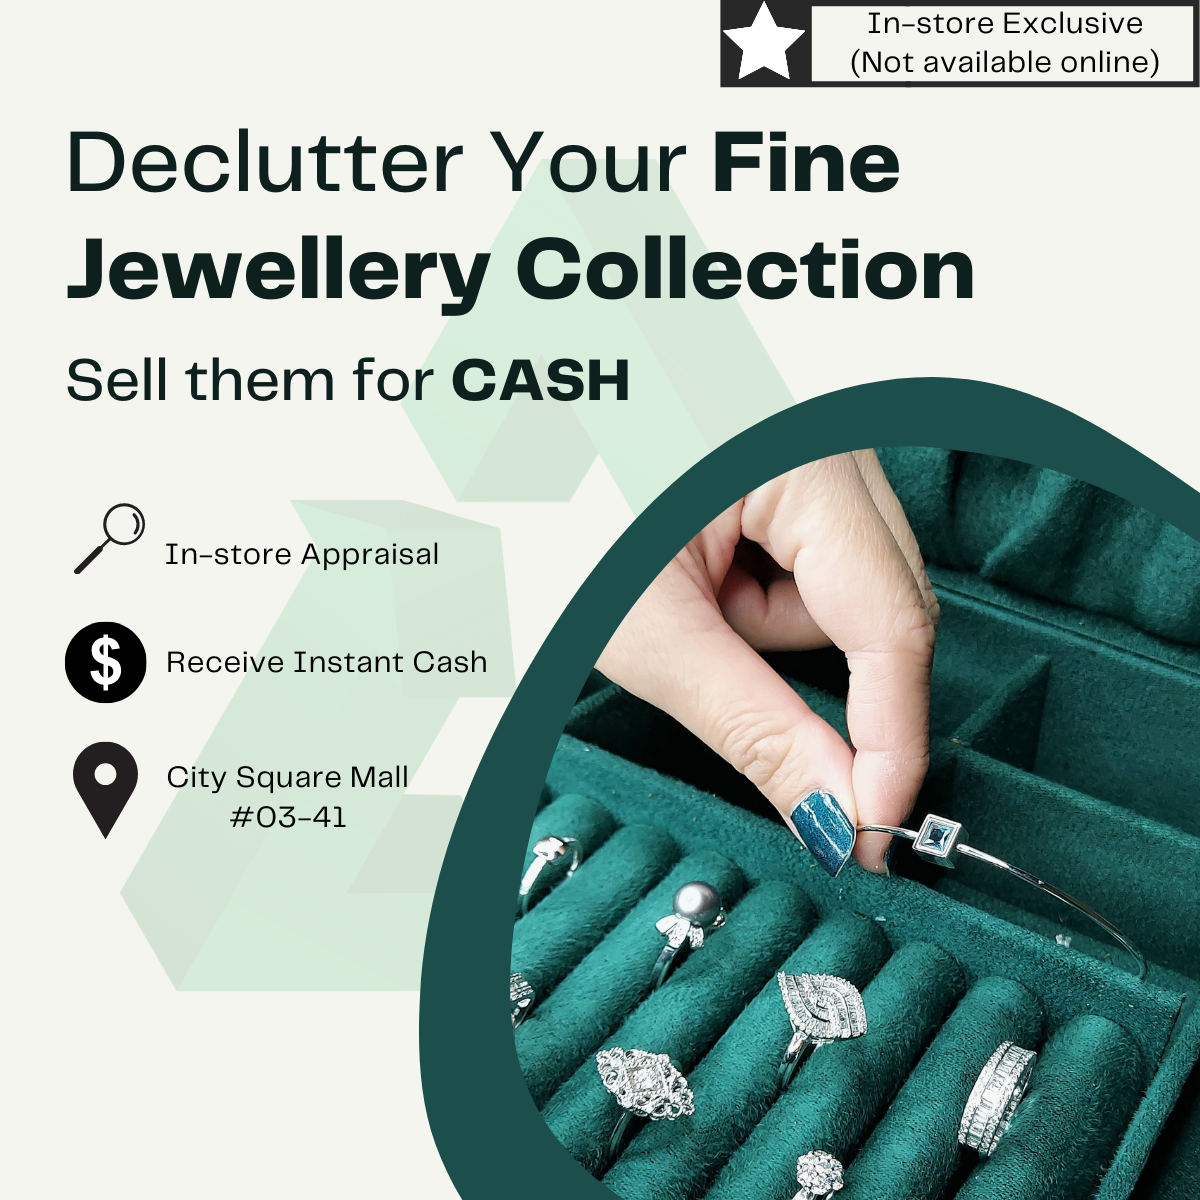 Declutter Your Fine Jewellery Collection